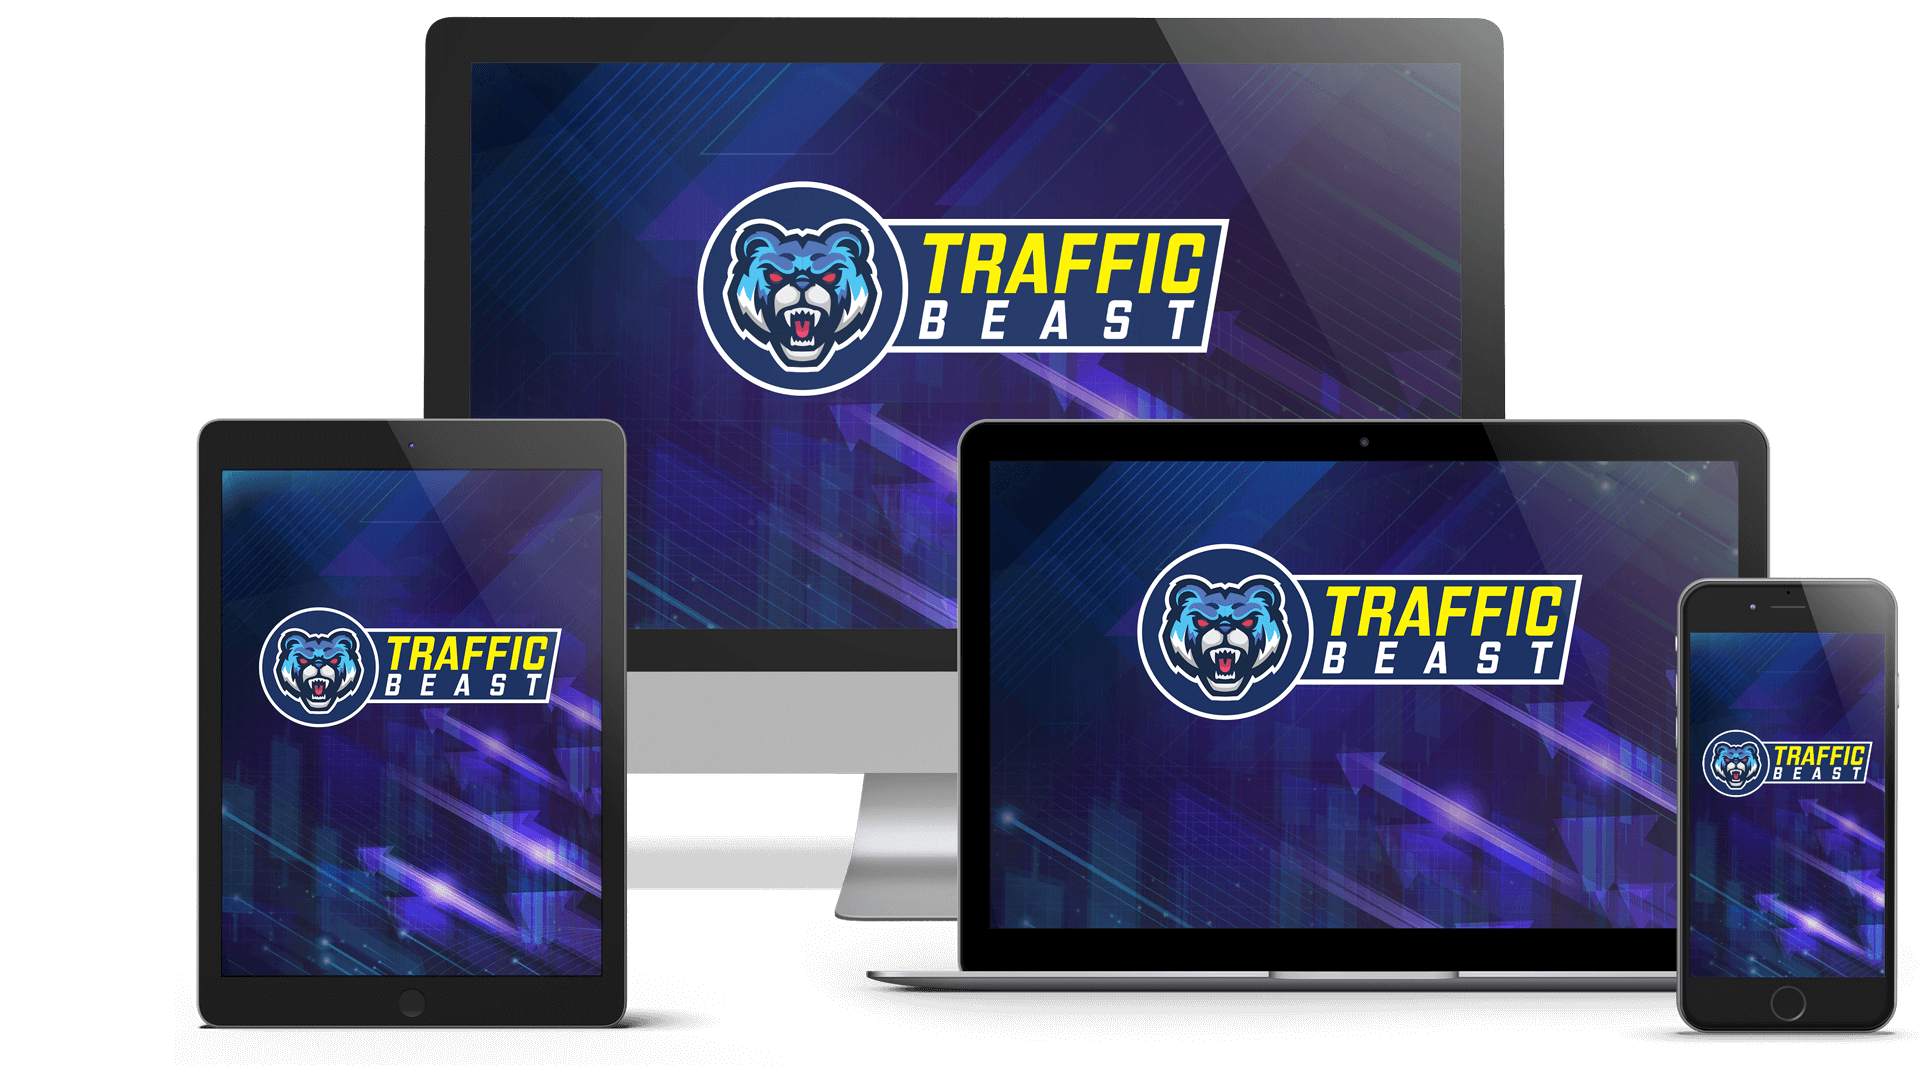 TRAFFIC BEAST REVIEW